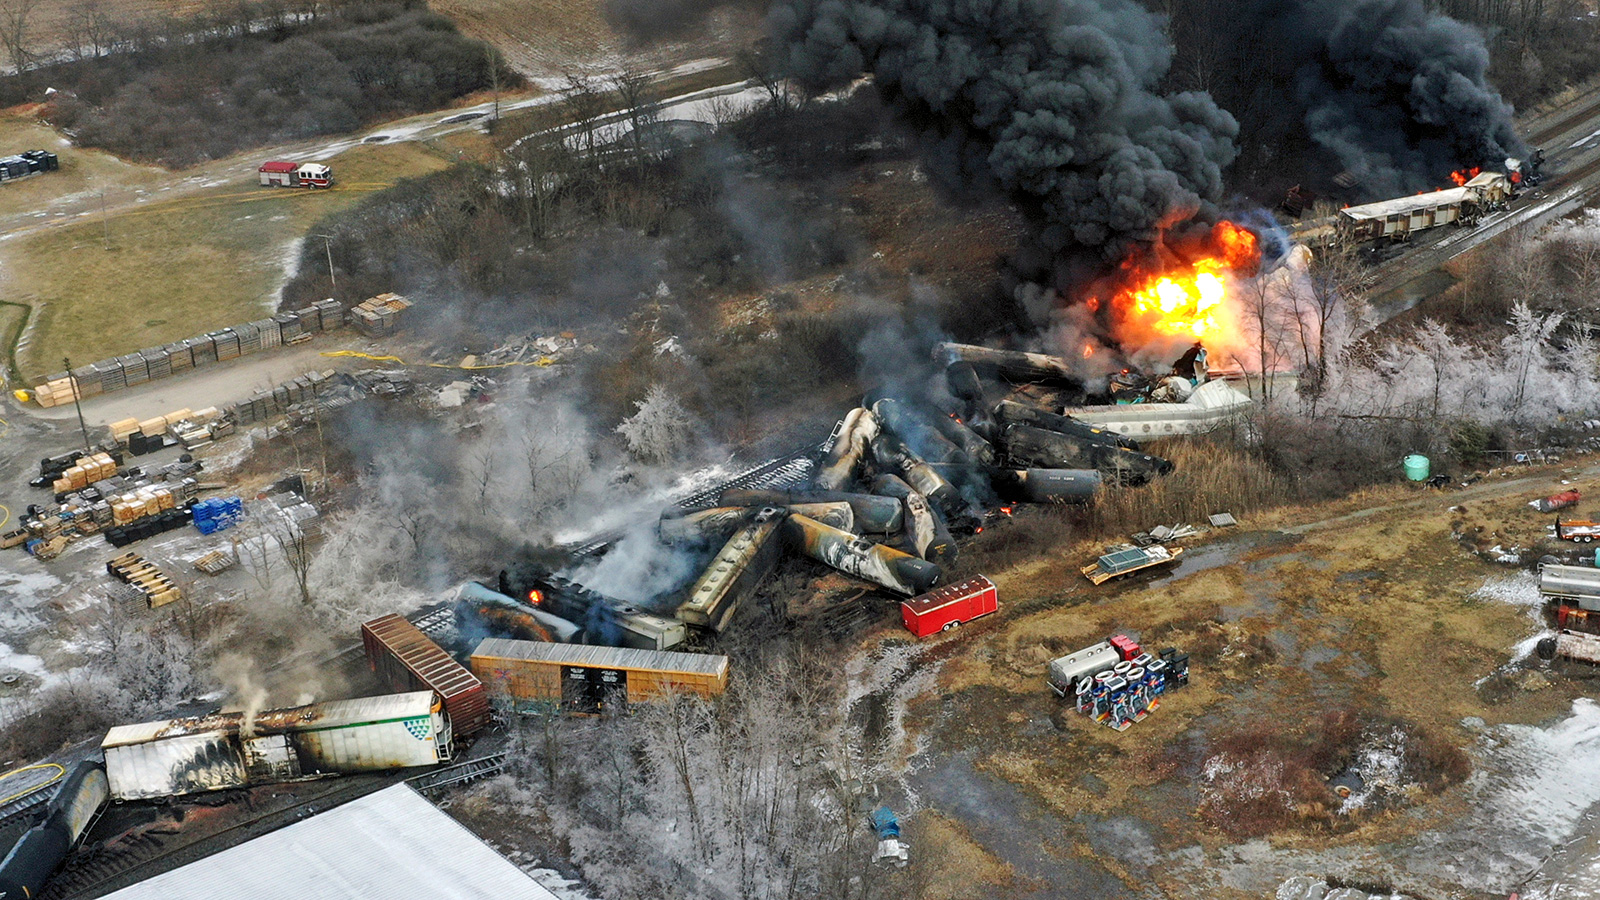 After a train derailment, Ohio residents are living the plot of a movie they helped make